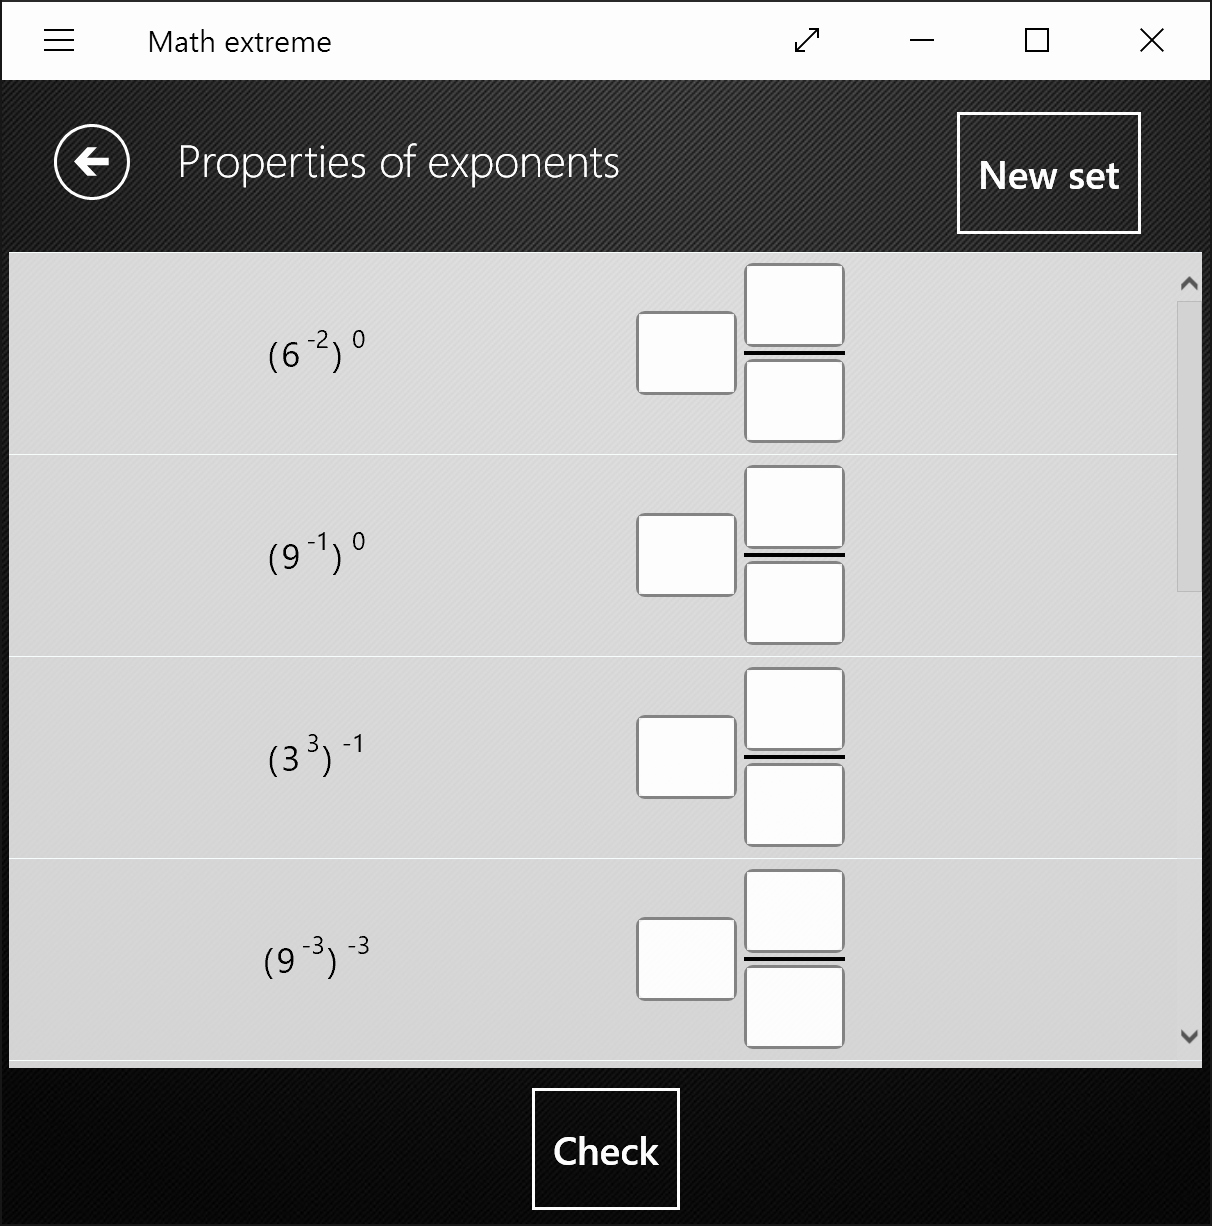 Properties Of Exponents Worksheet New Math Extreme New Worksheets Exponents